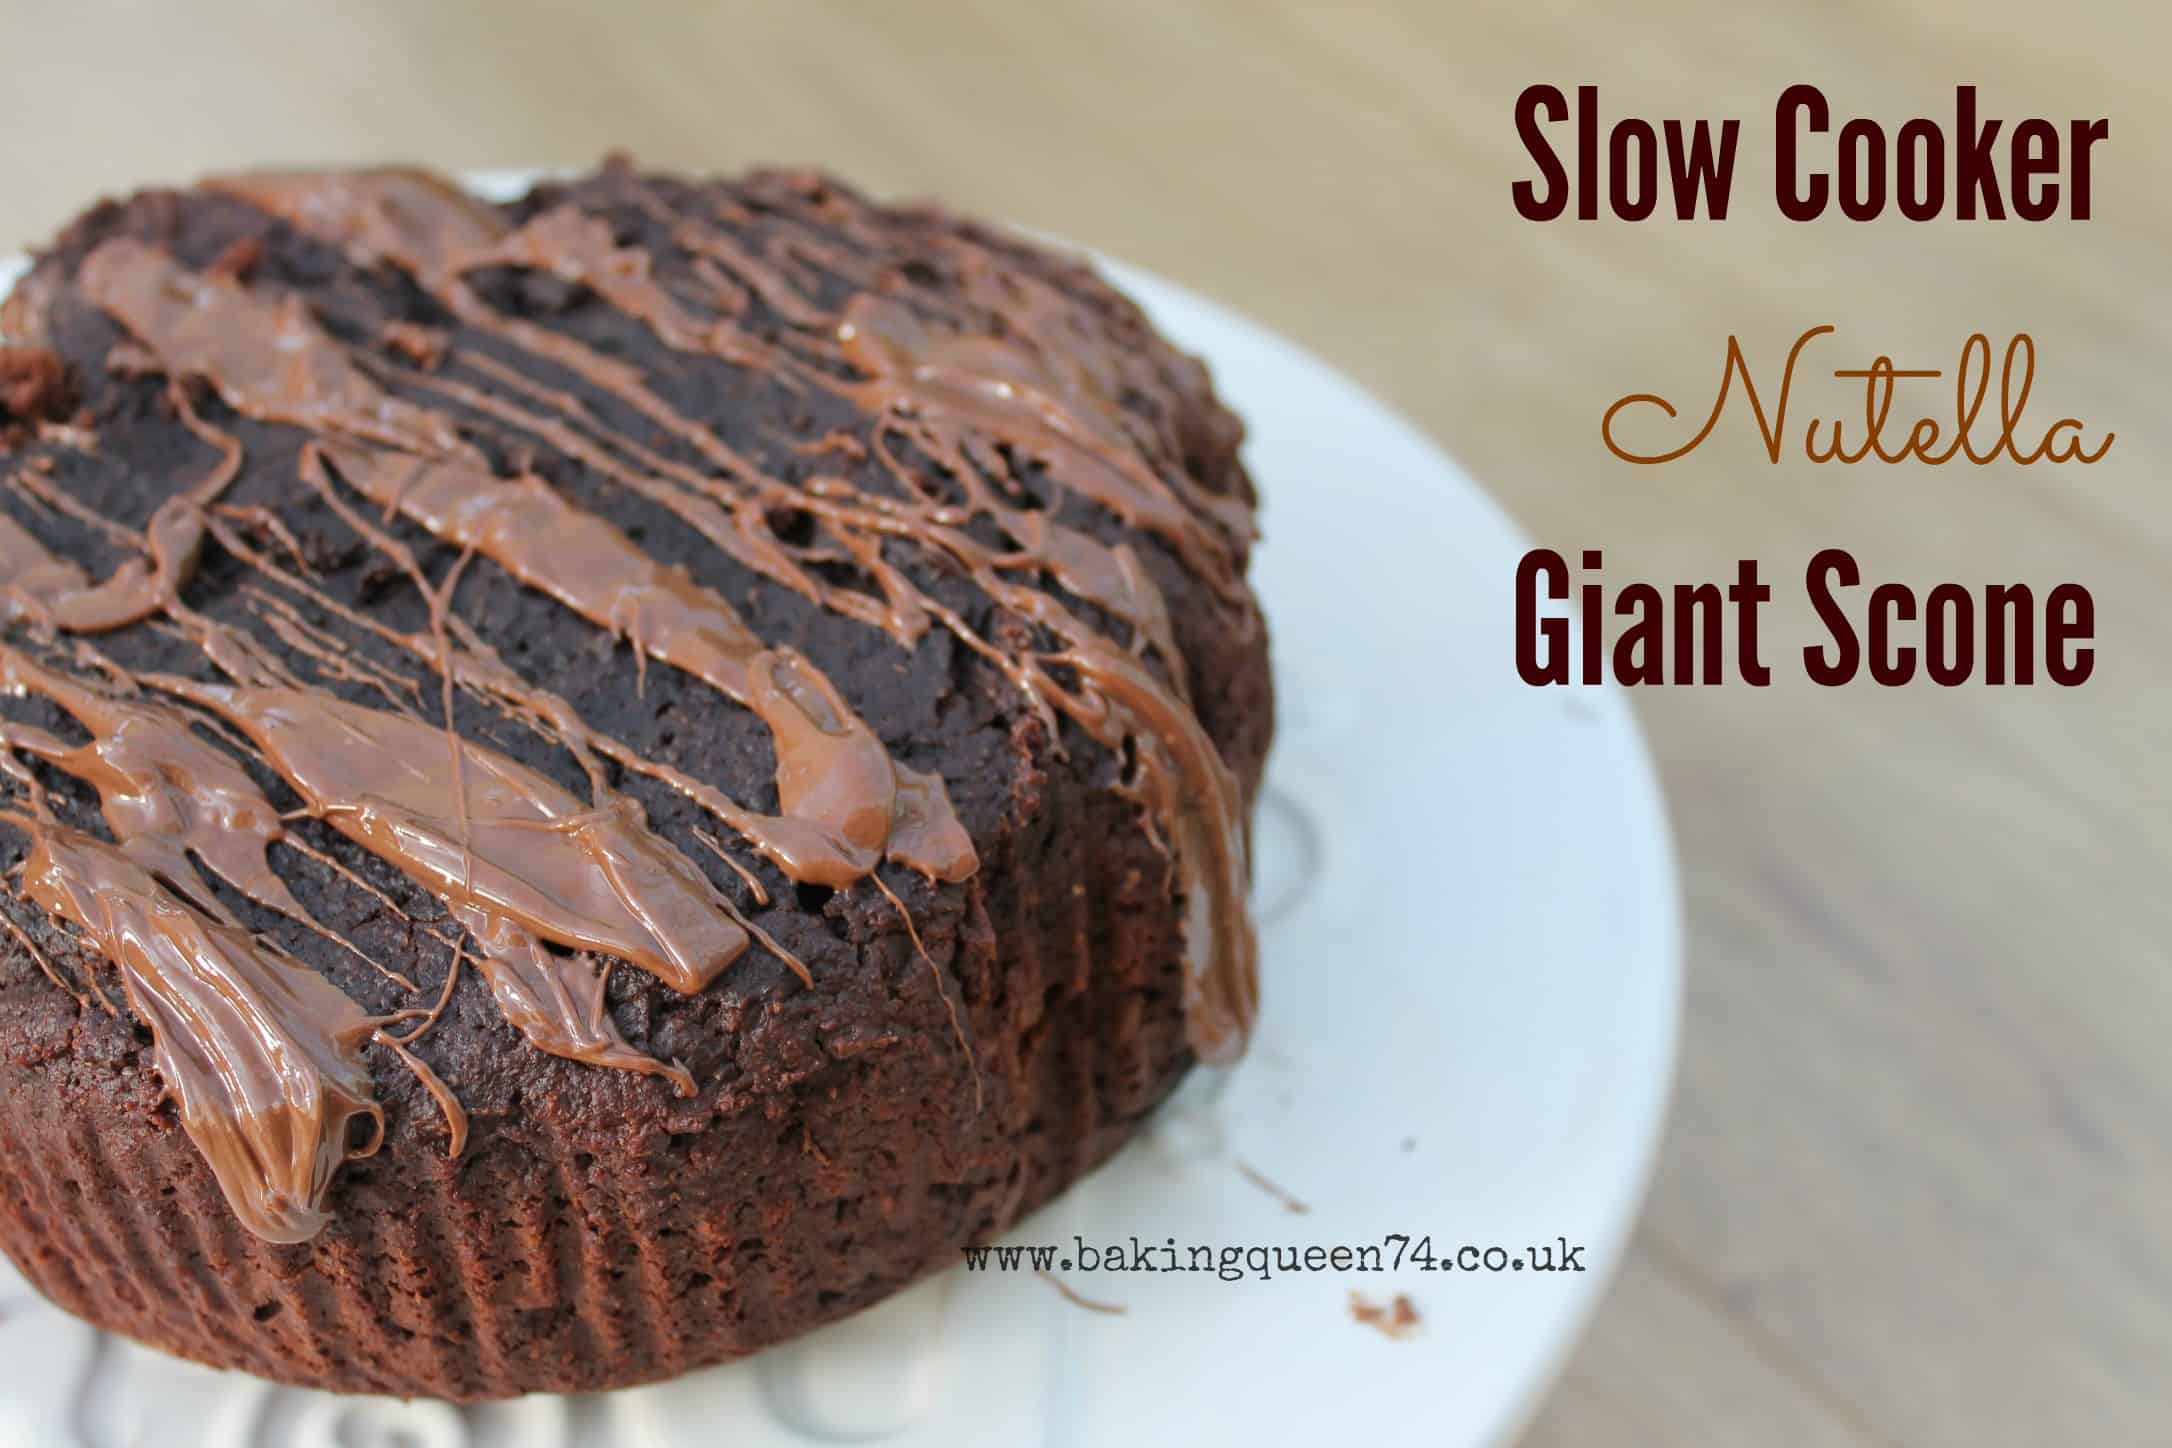 Slow cooker Nutella giant scone